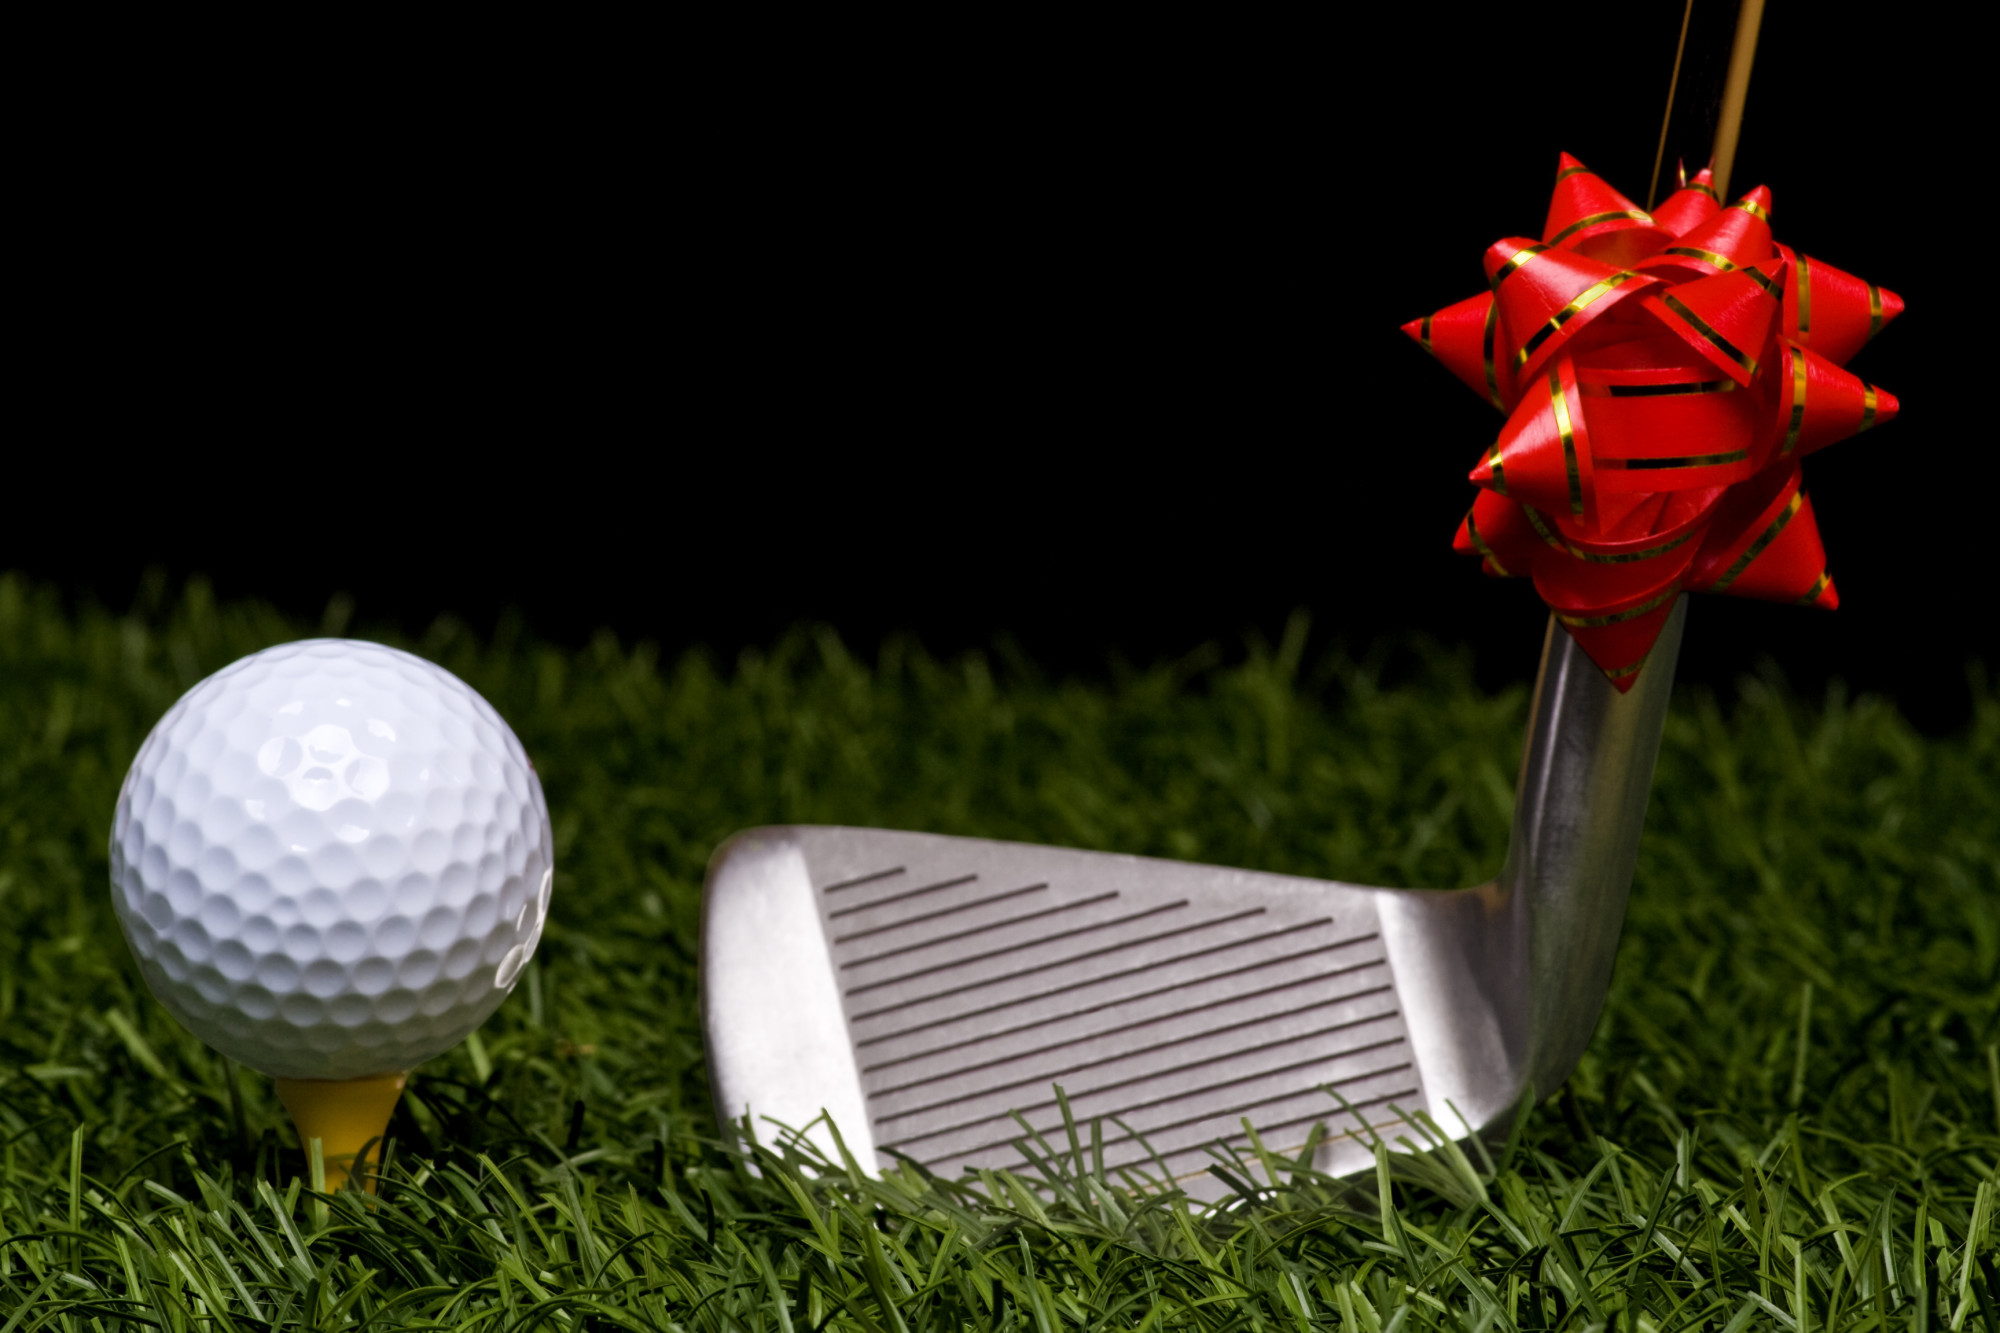 Creative Golf Christmas Gifts for the Golfer in Your Family